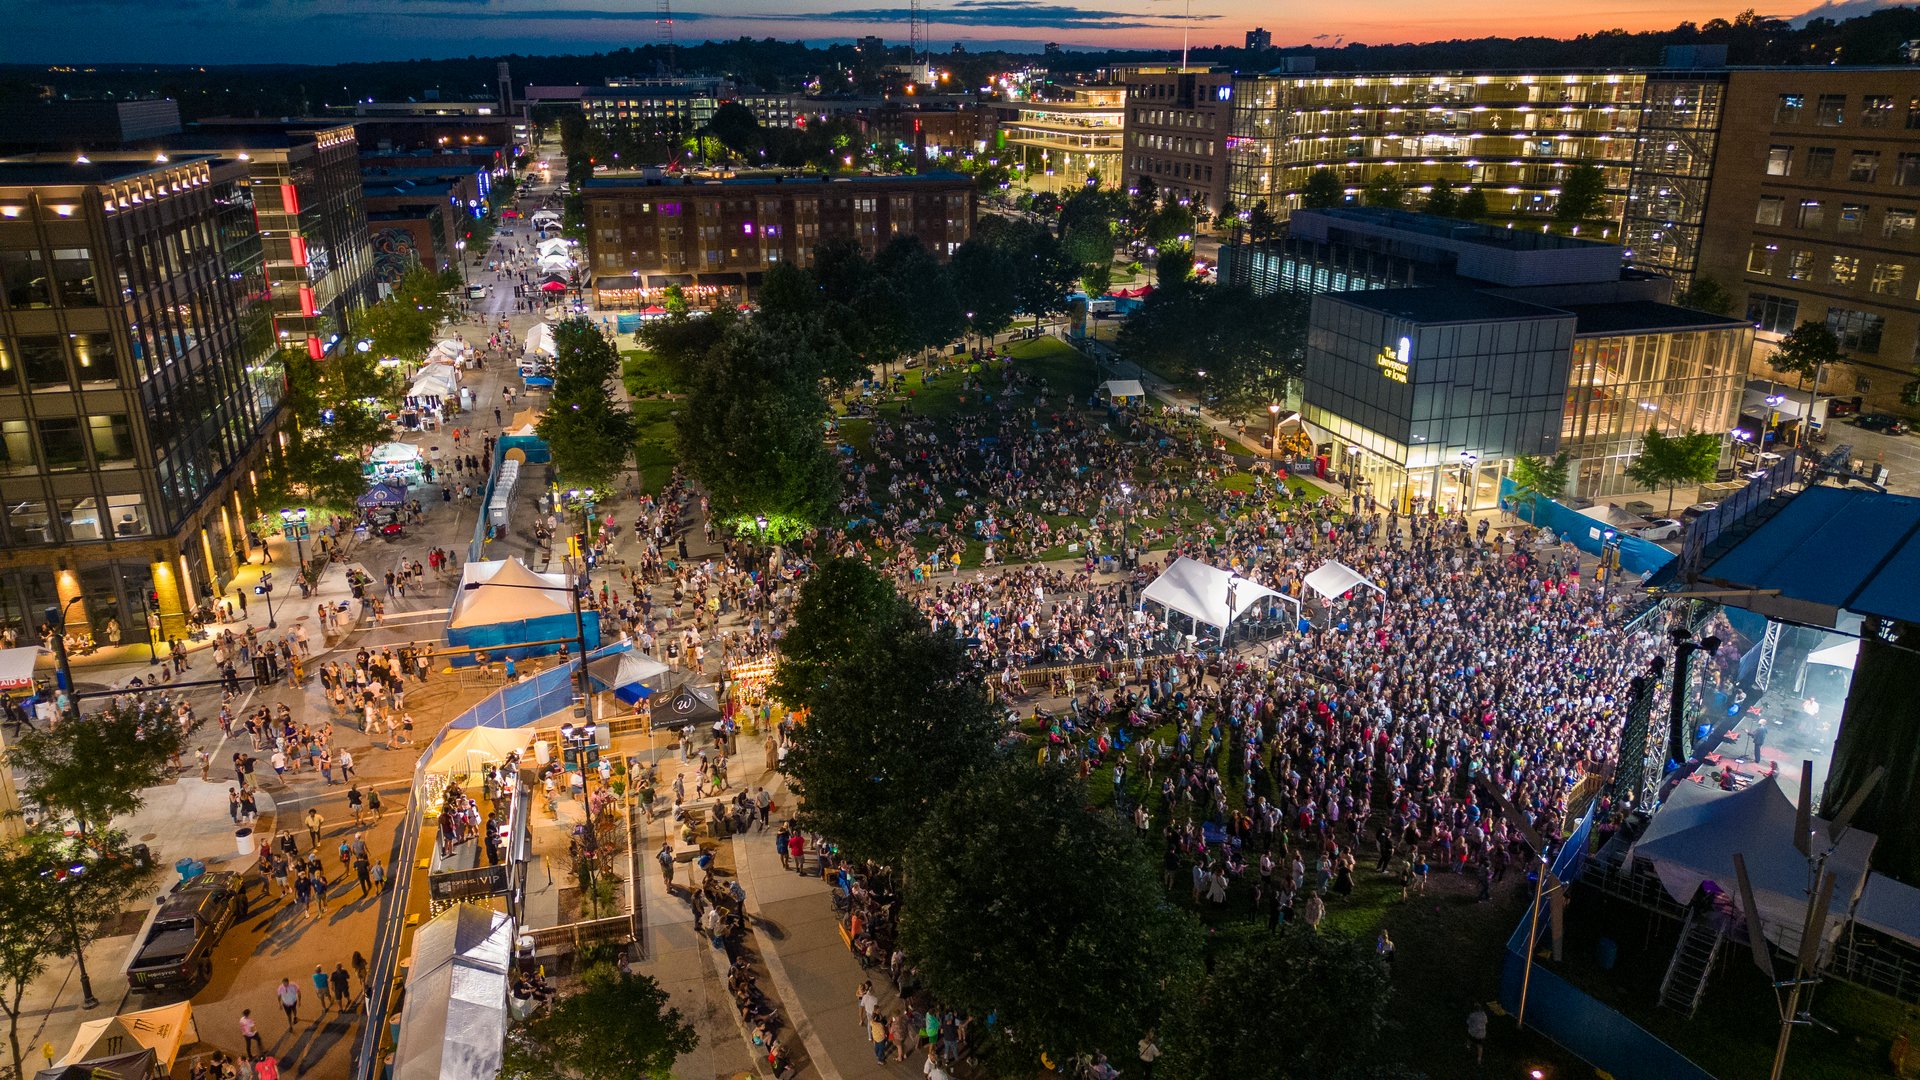 Overhead drone shot of large crowd at a Music Festival in Downtown Des Moines